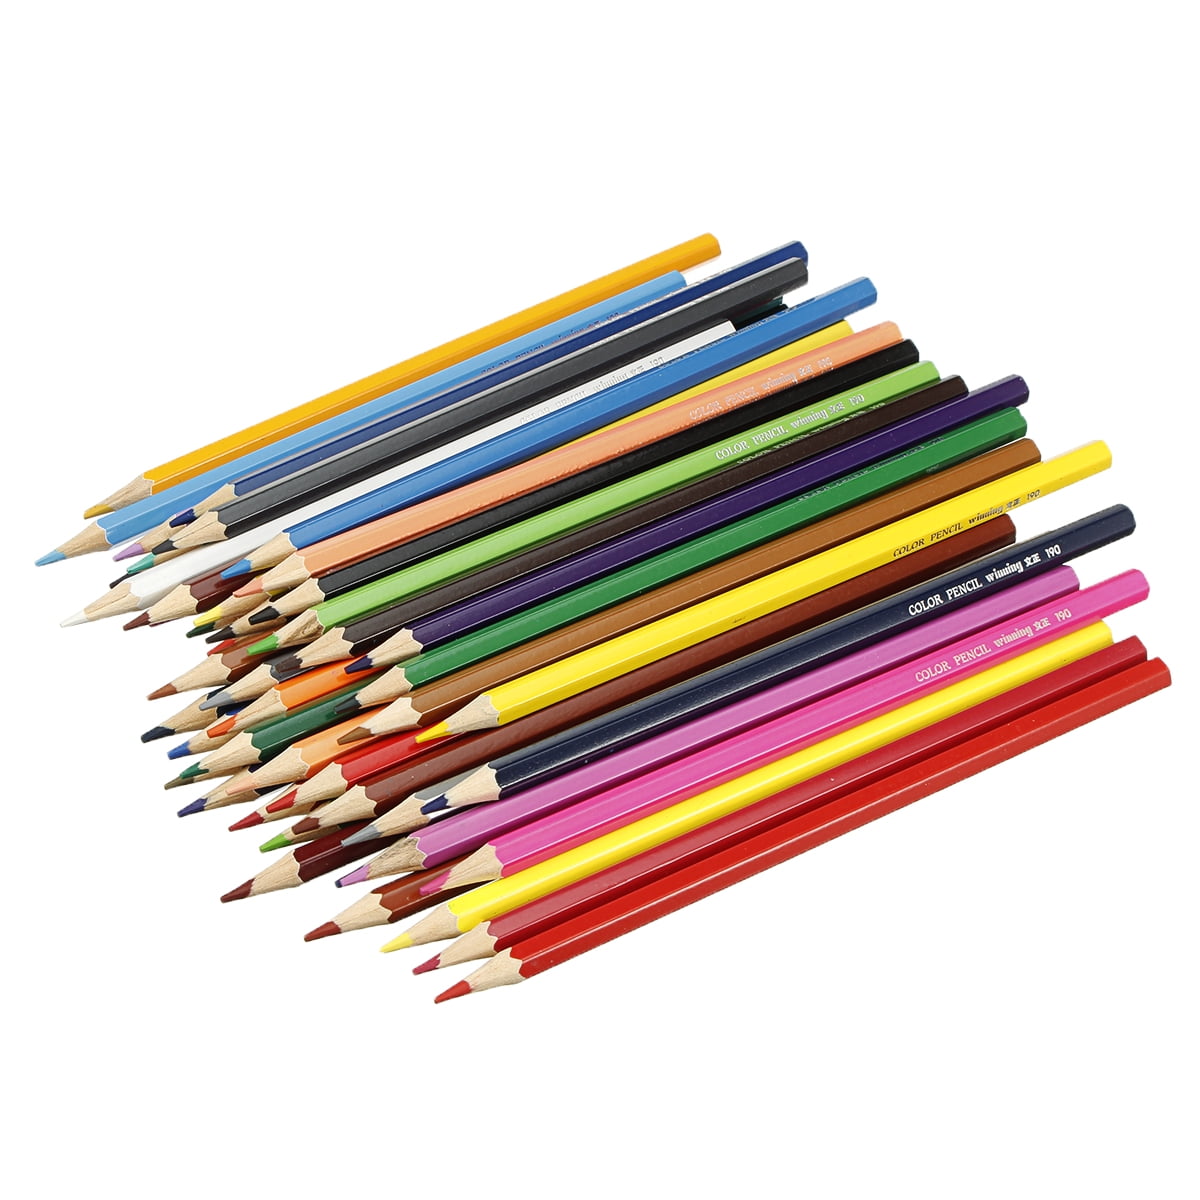 Drawing Pencil Gift Sets from Rex Art Supplies